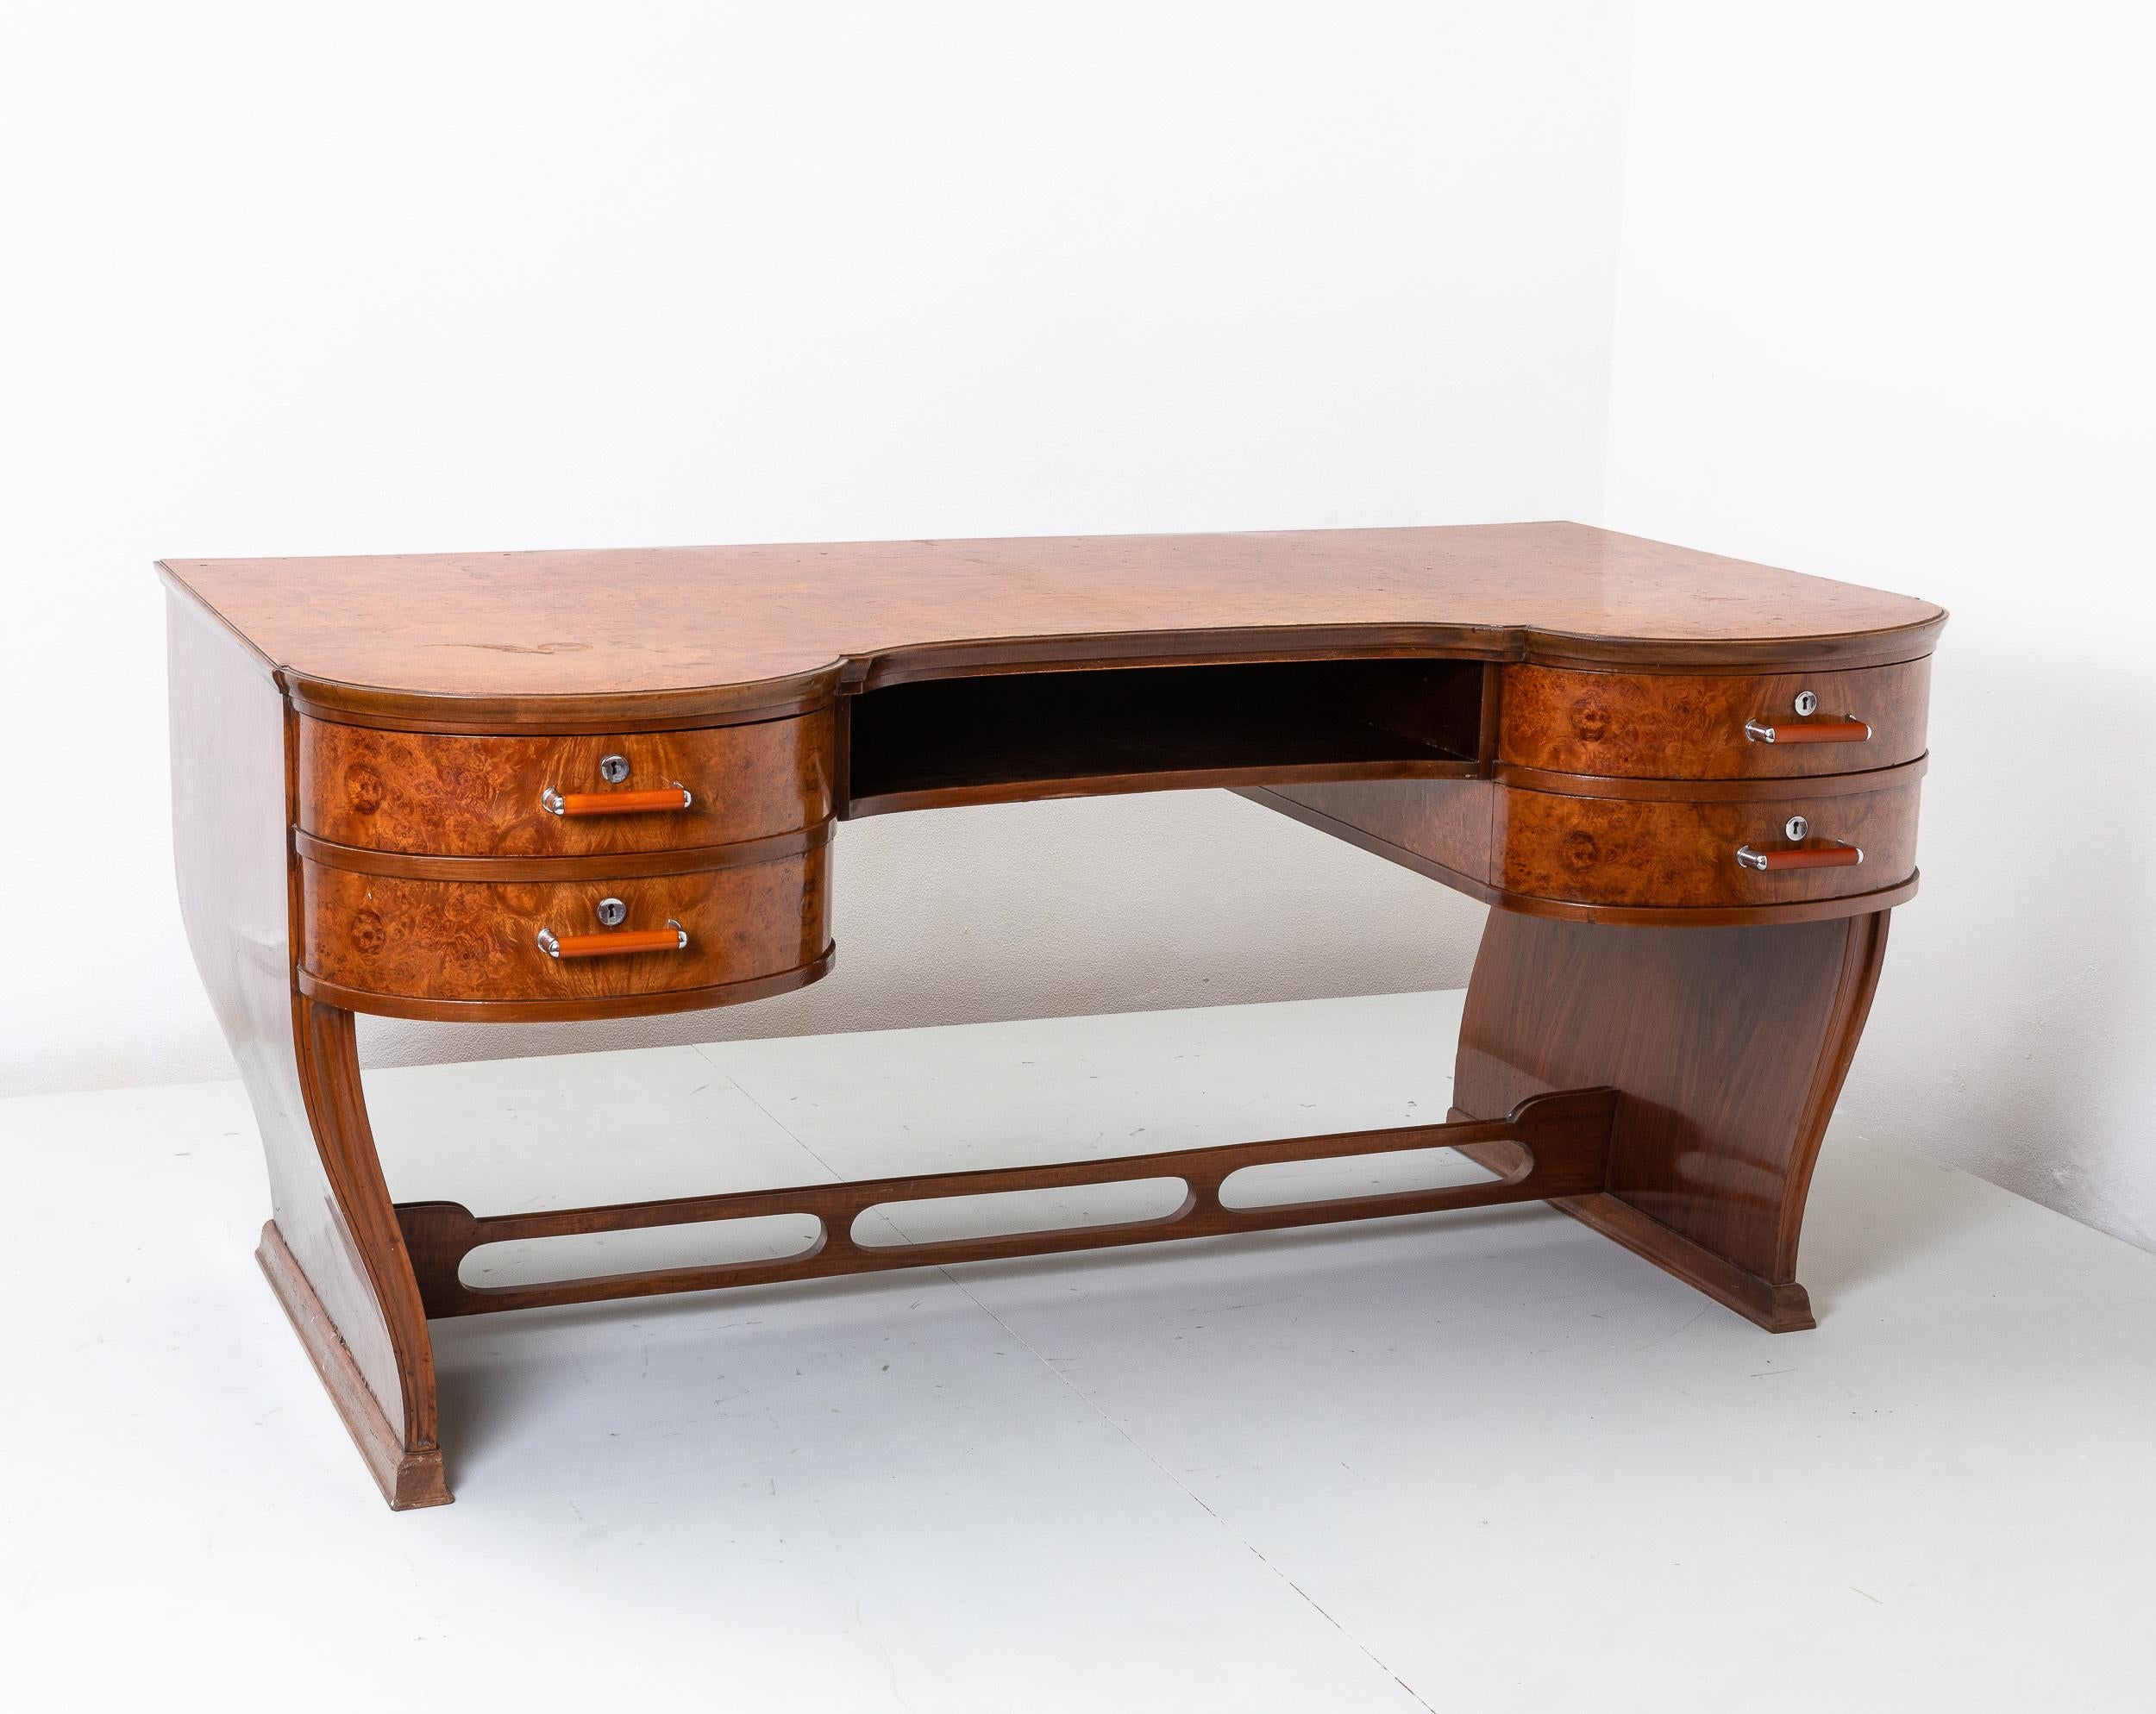 Prod. Italy, c. 1930 Deco desk with curvilinear forms  For Sale 4